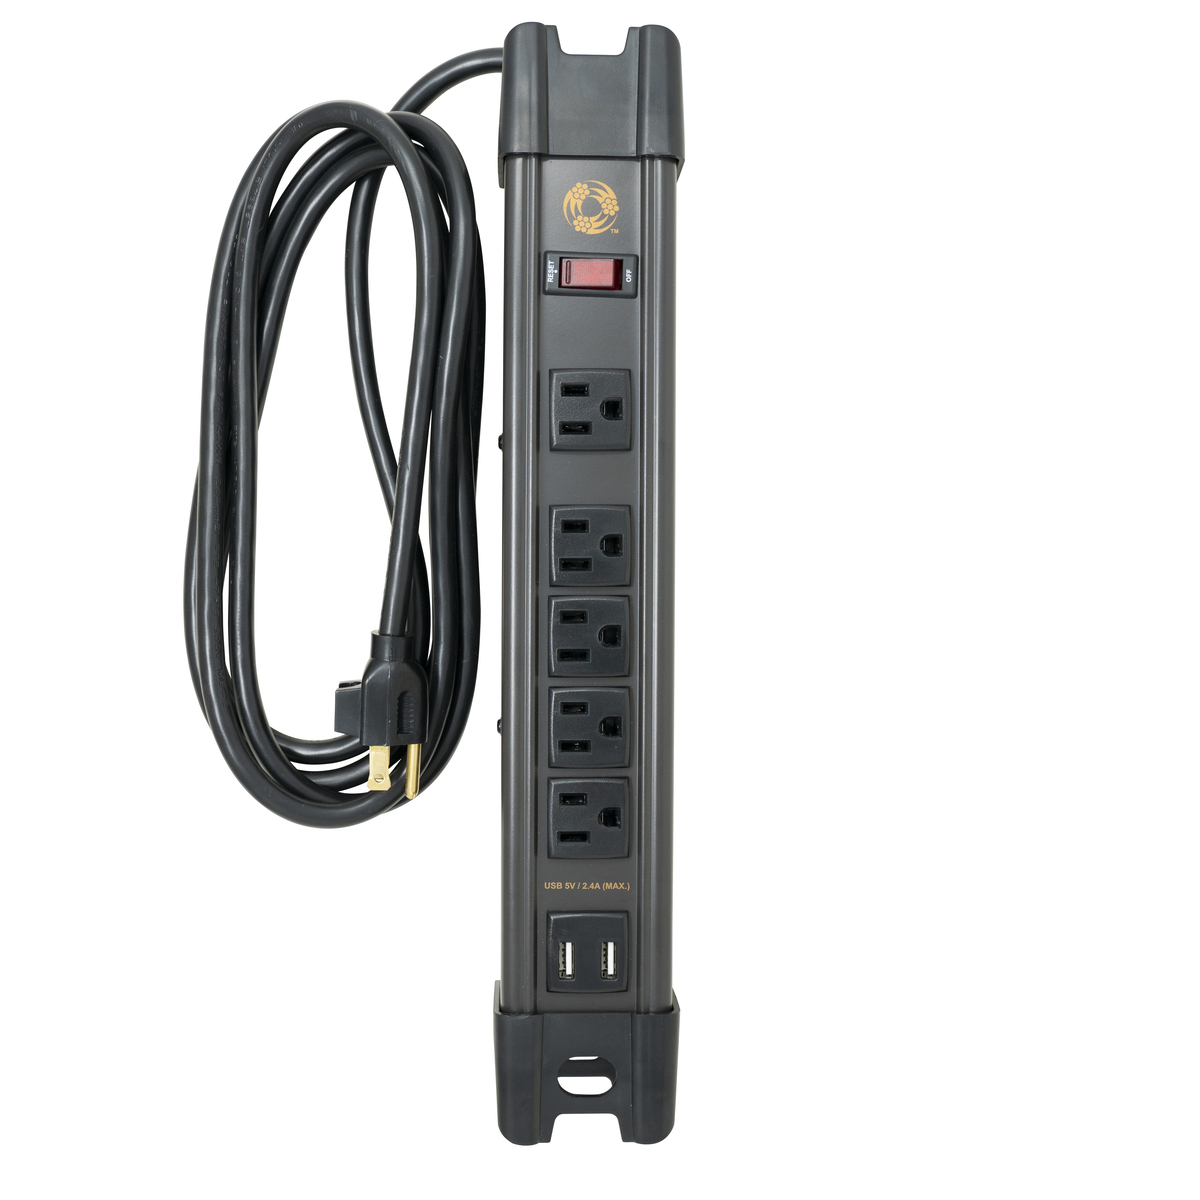 Southwire Magnetic Power Strip W/USB, 5 Out, 8Ft